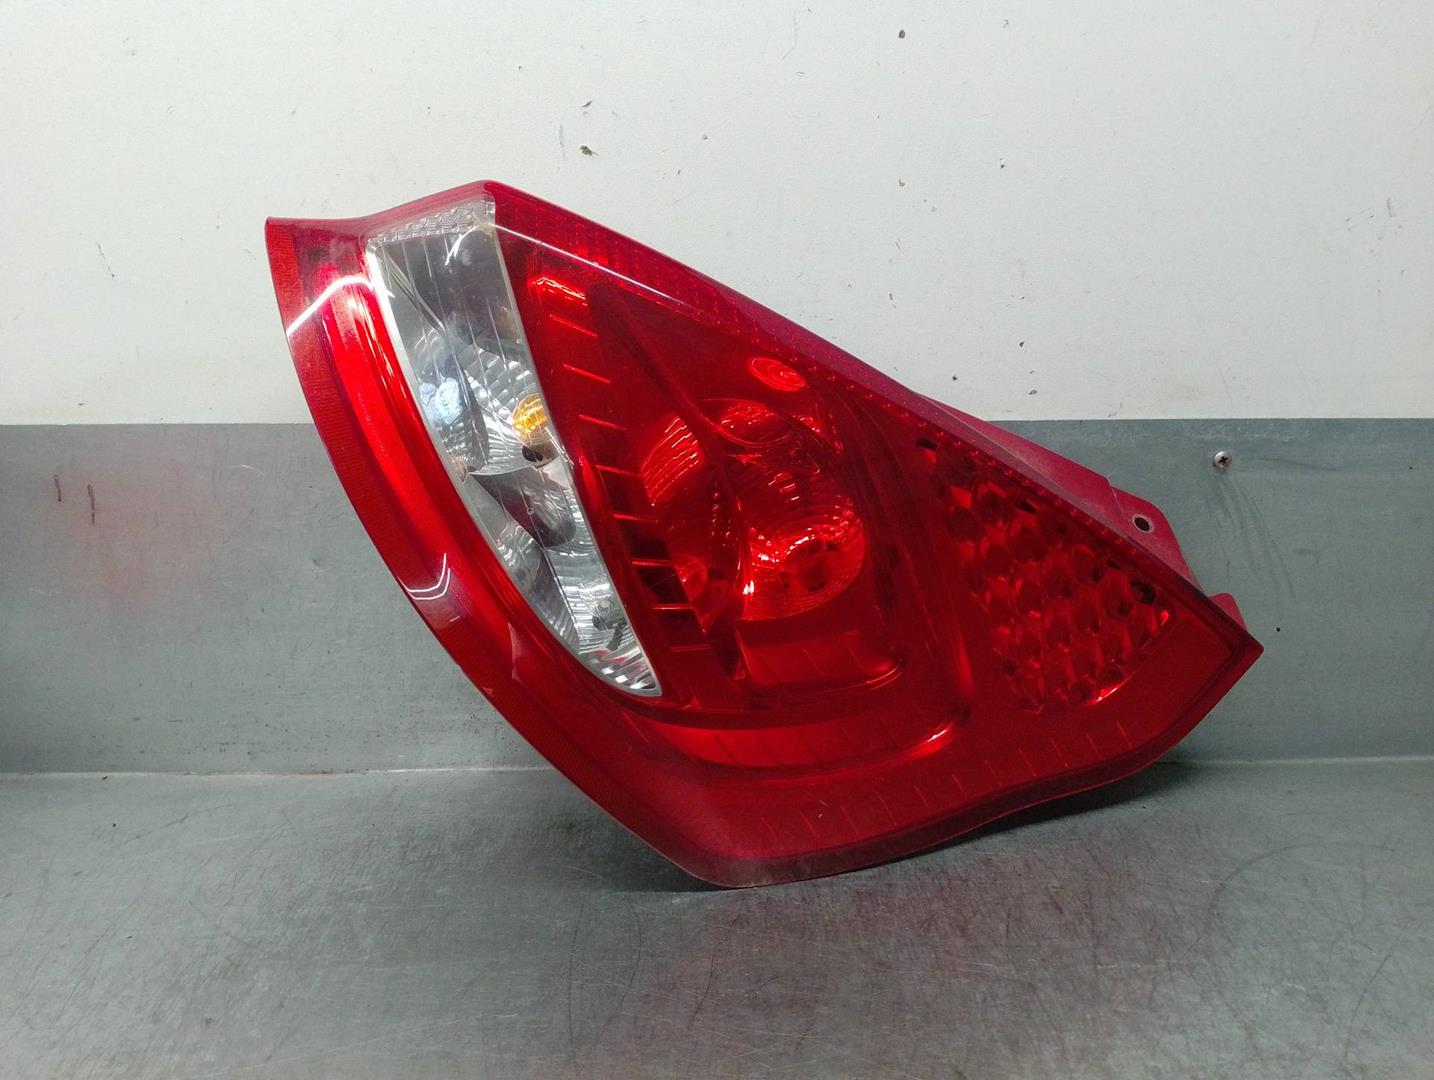 FORD Fiesta 5 generation (2001-2010) Rear Right Taillight Lamp 8A6113404A, 5PUERTAS 21733099